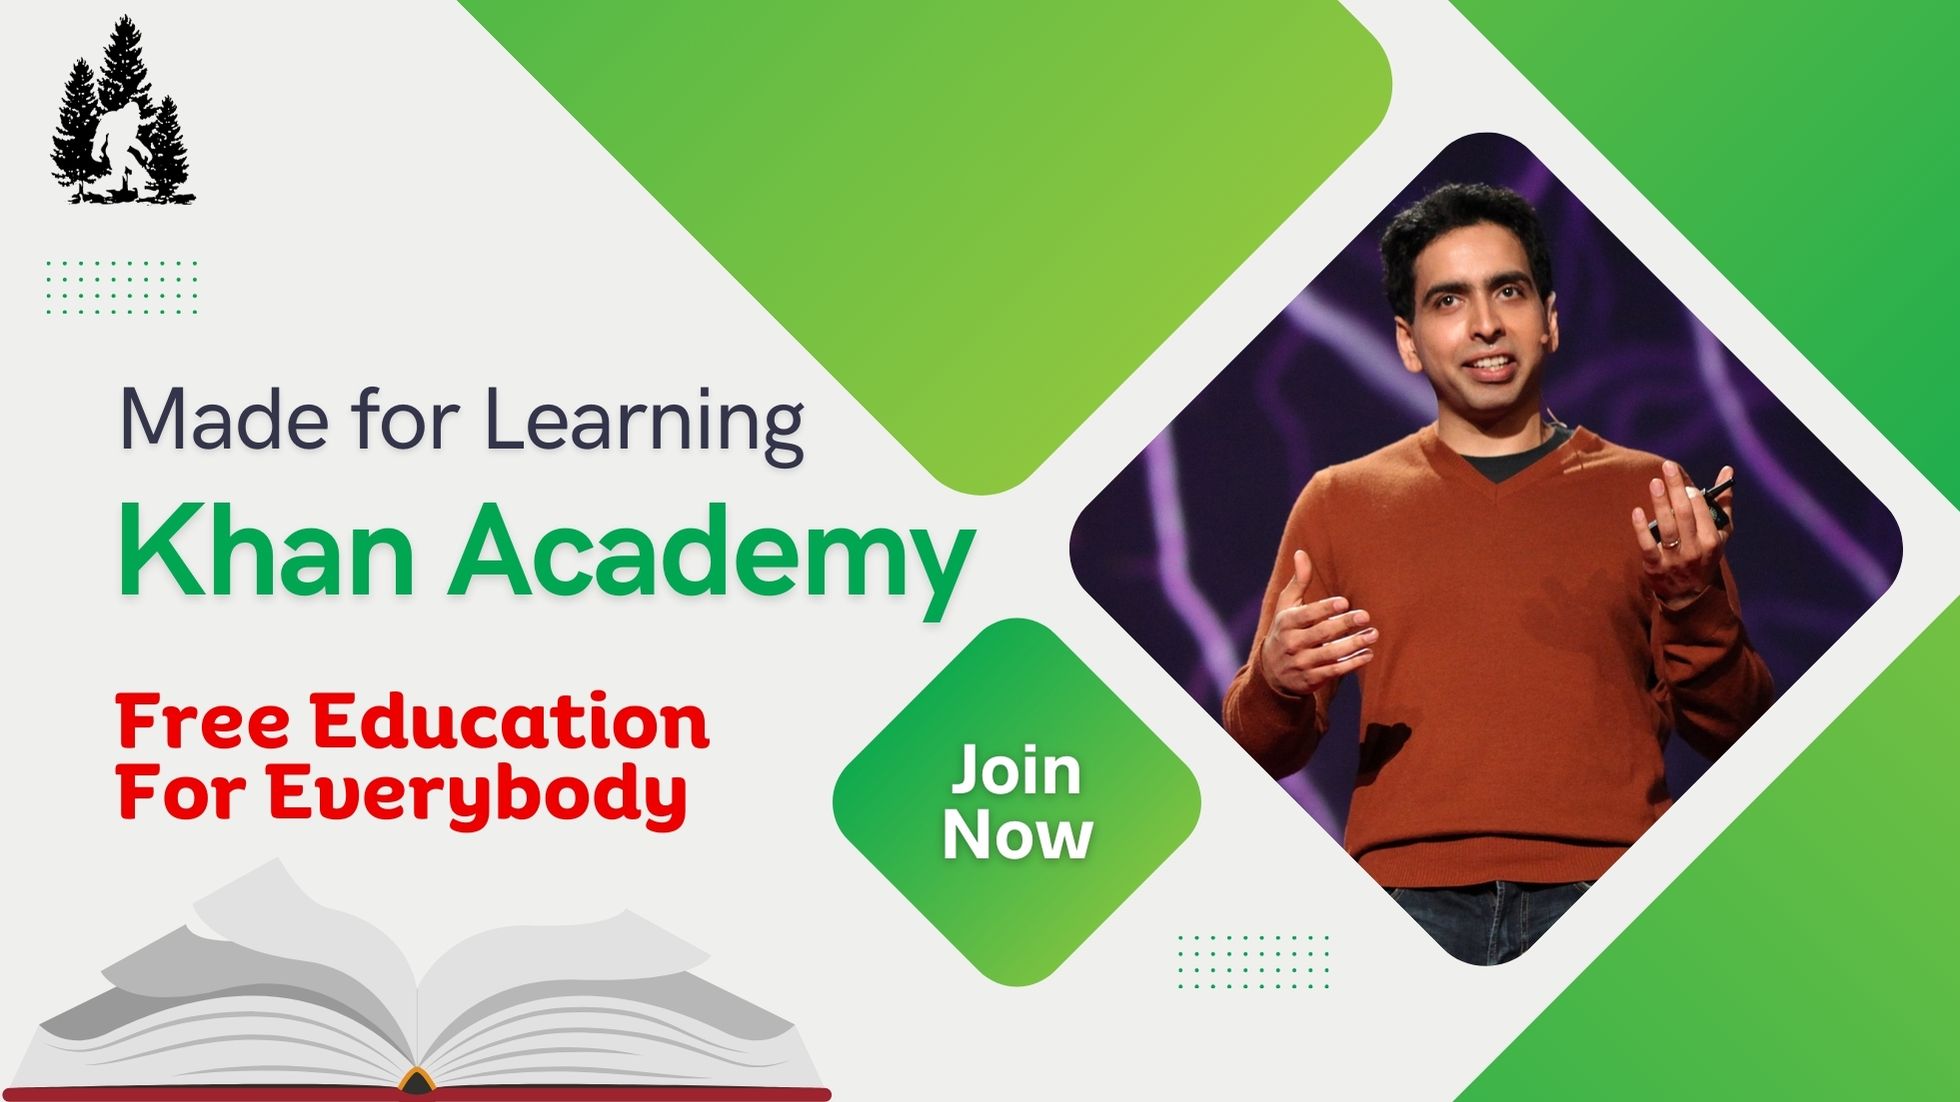 Khan Academy – Made for Learning | Free Education for Everybody